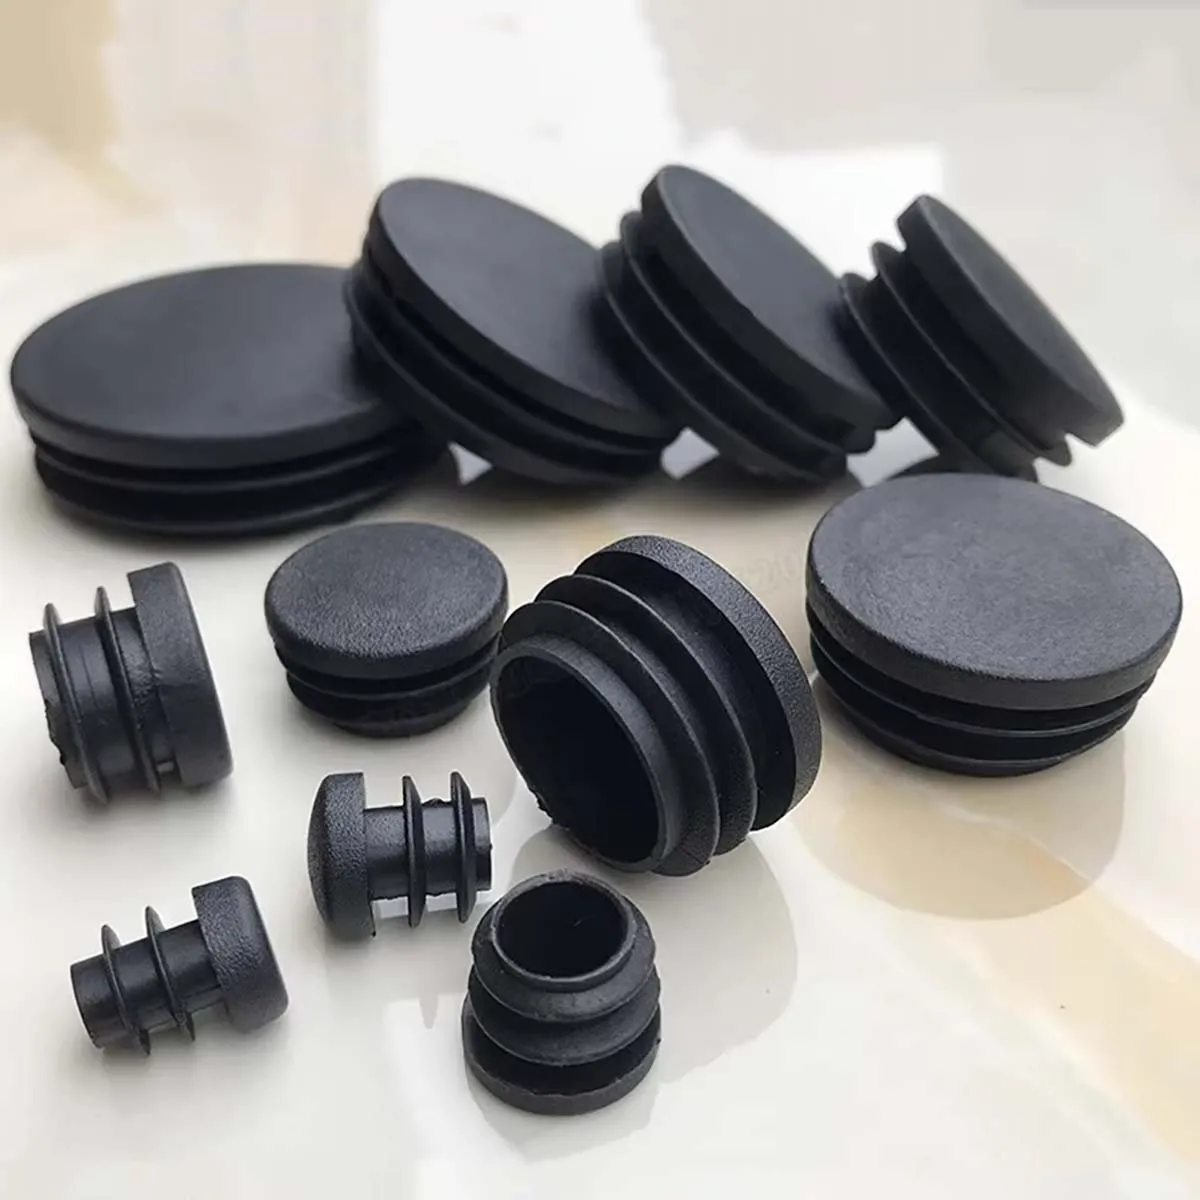 

Outer Dia 48/50/58/60mm PE Plastic Round Pipe Plugs Black Hole End Caps Inserts Seal Plugs Chair Non-Slip Foot Pads